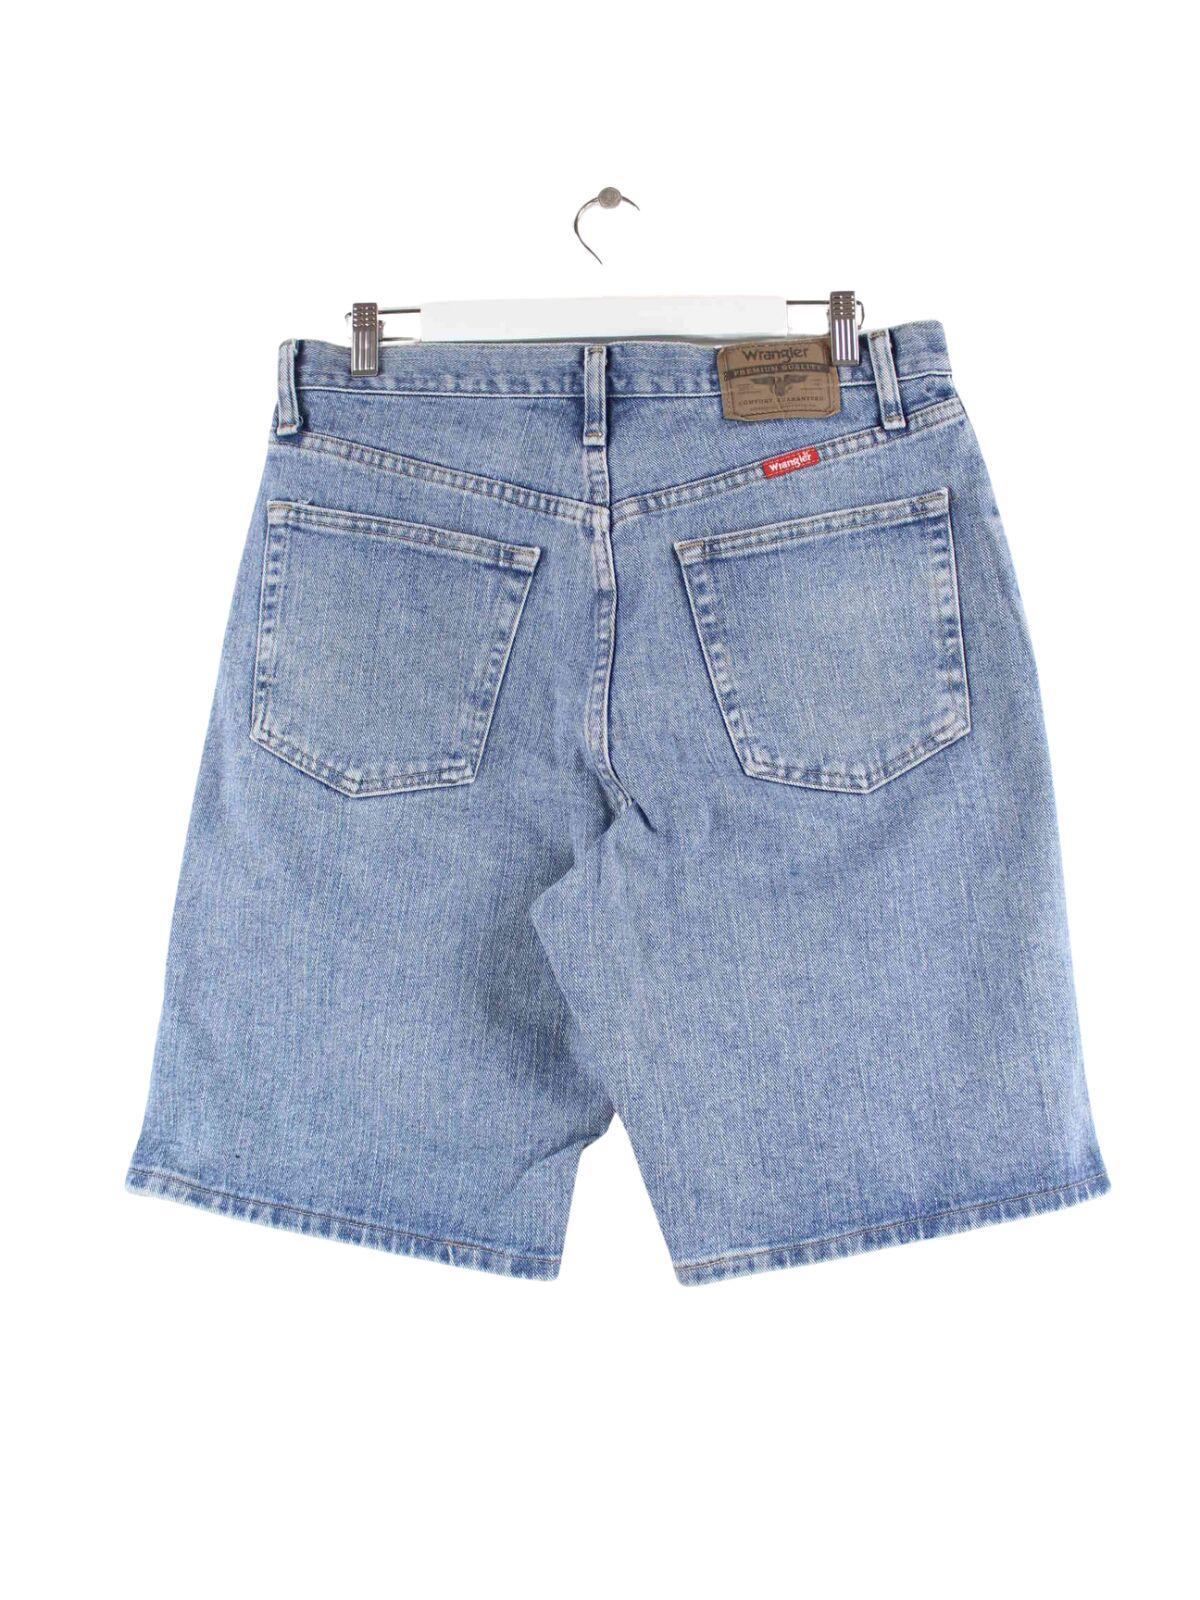 Wrangler Relaxed Fit Jeans Shorts Blau W32 (back image)